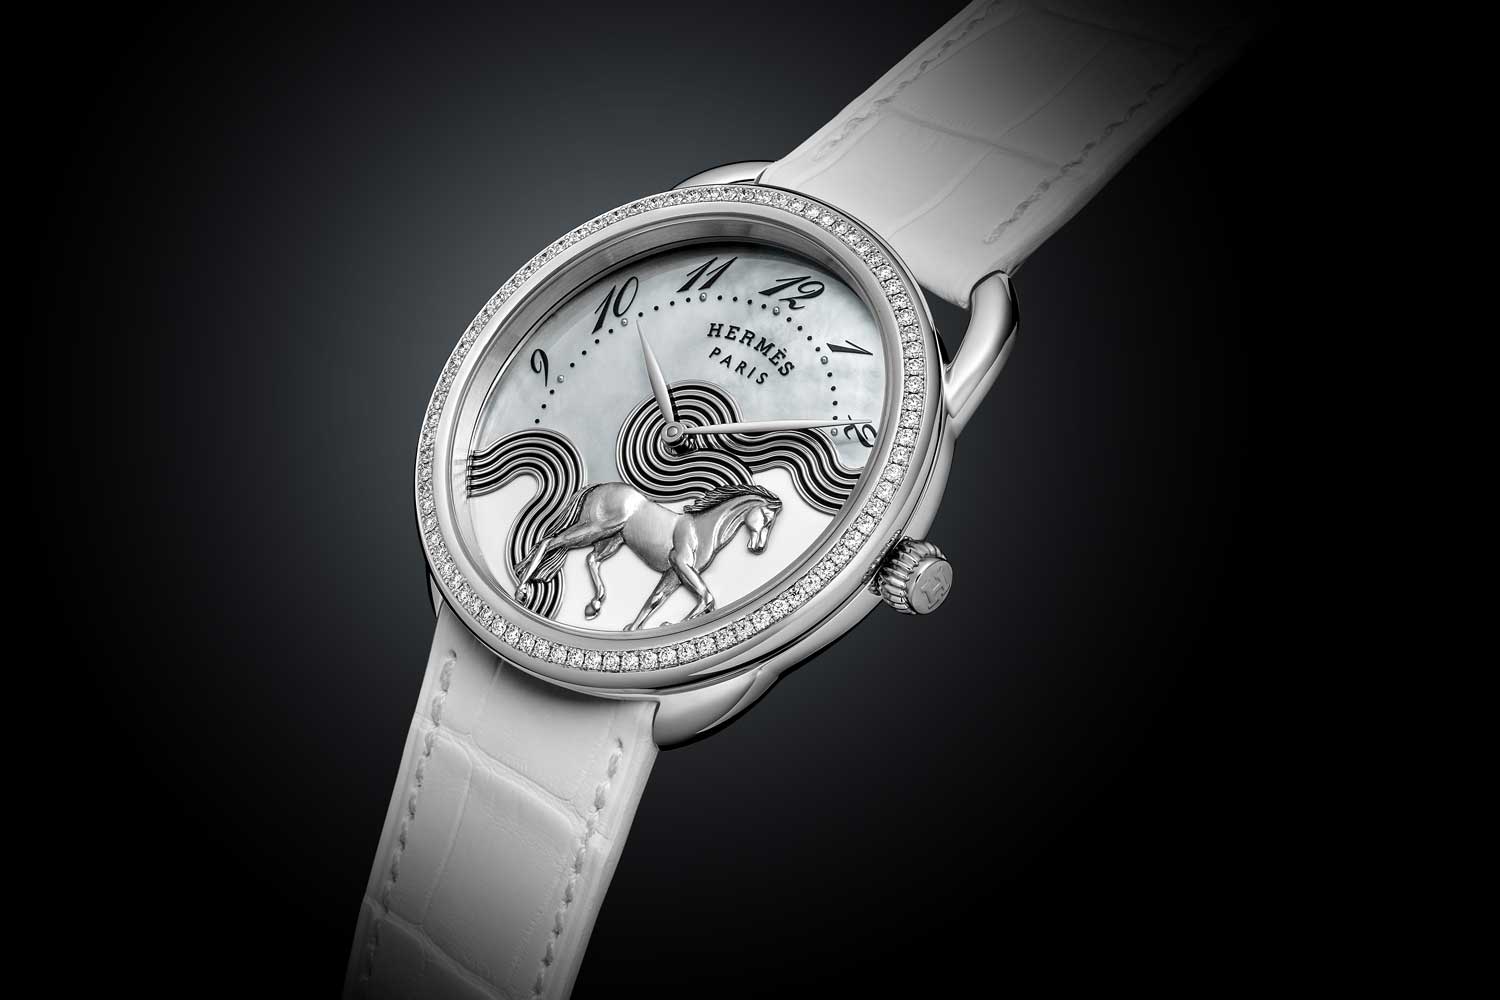 The Hermès Arceau Cheval Cosmique in mother-of-pearl and enamel dial.